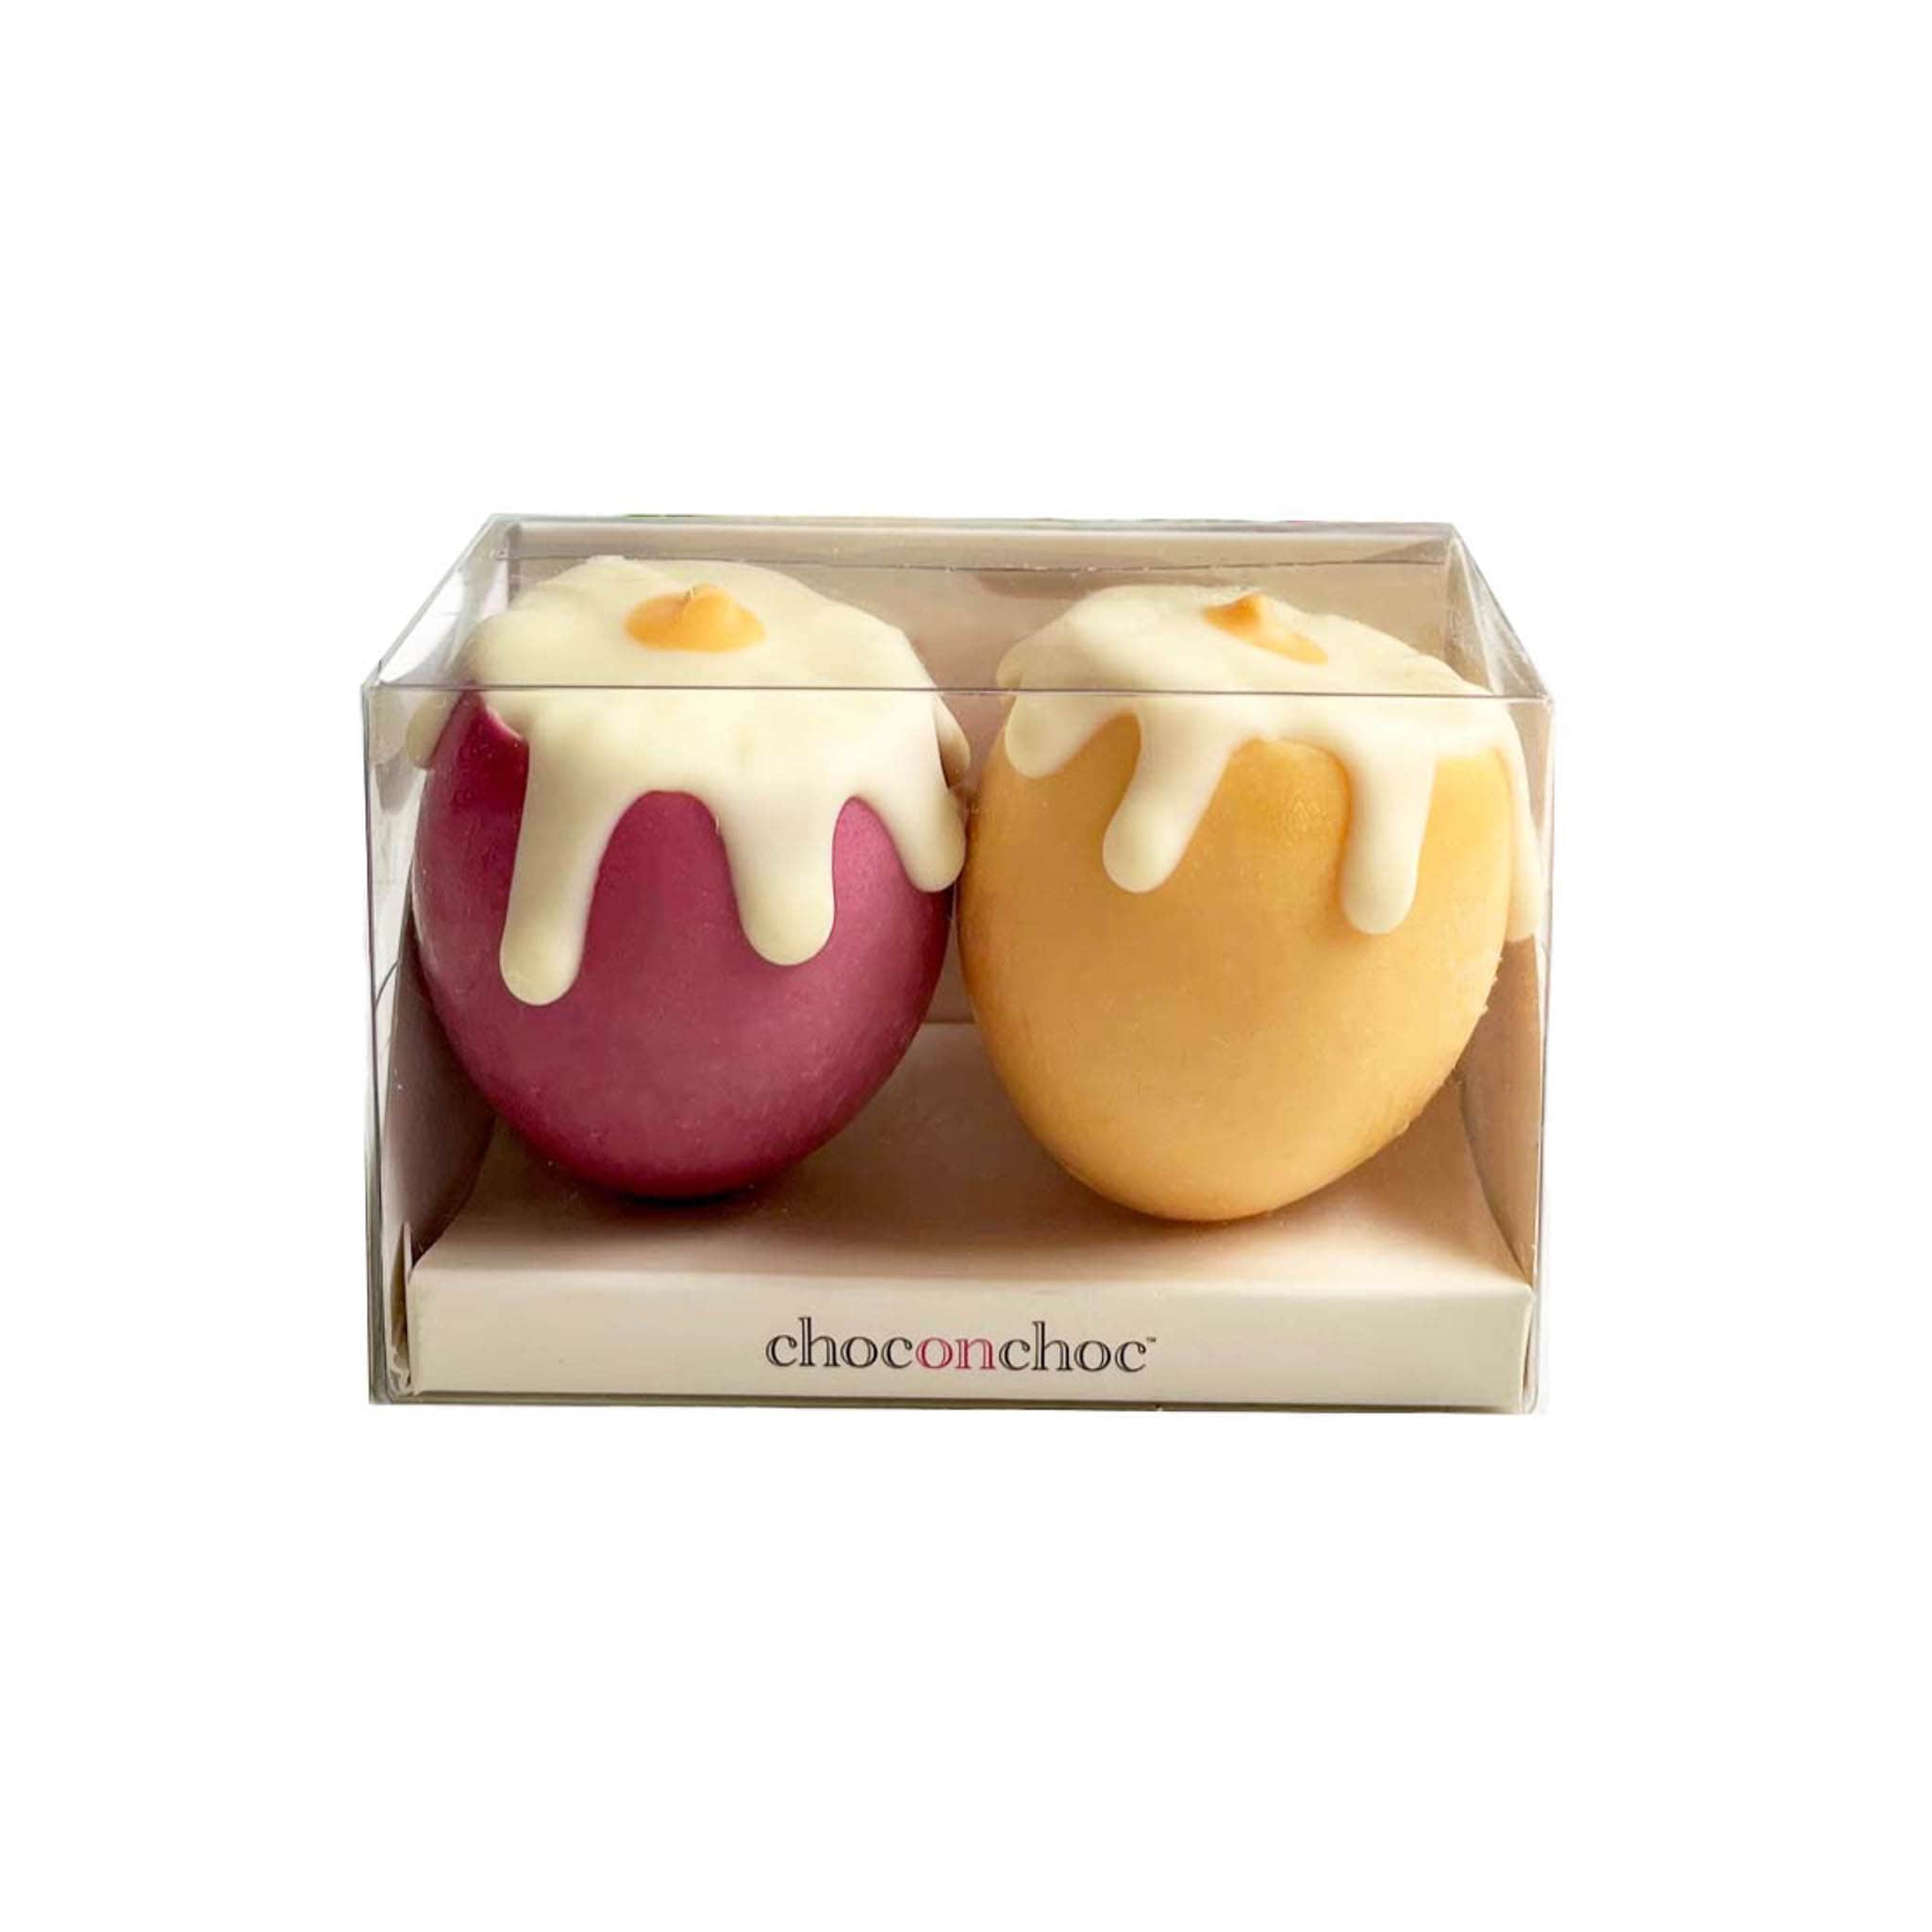 ChocOnChoc Set of 2 Drippy Easter Eggs with Caramel Filling, 154g